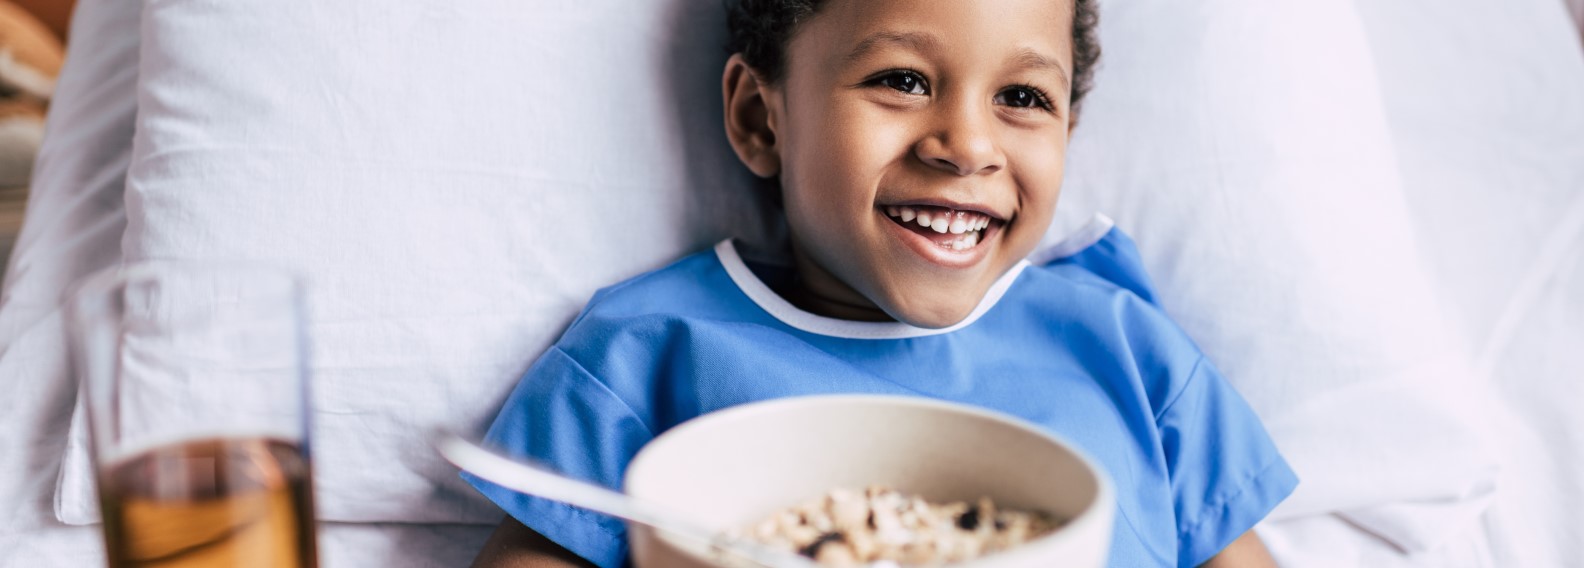 Child in a hospital bed eating and smiling